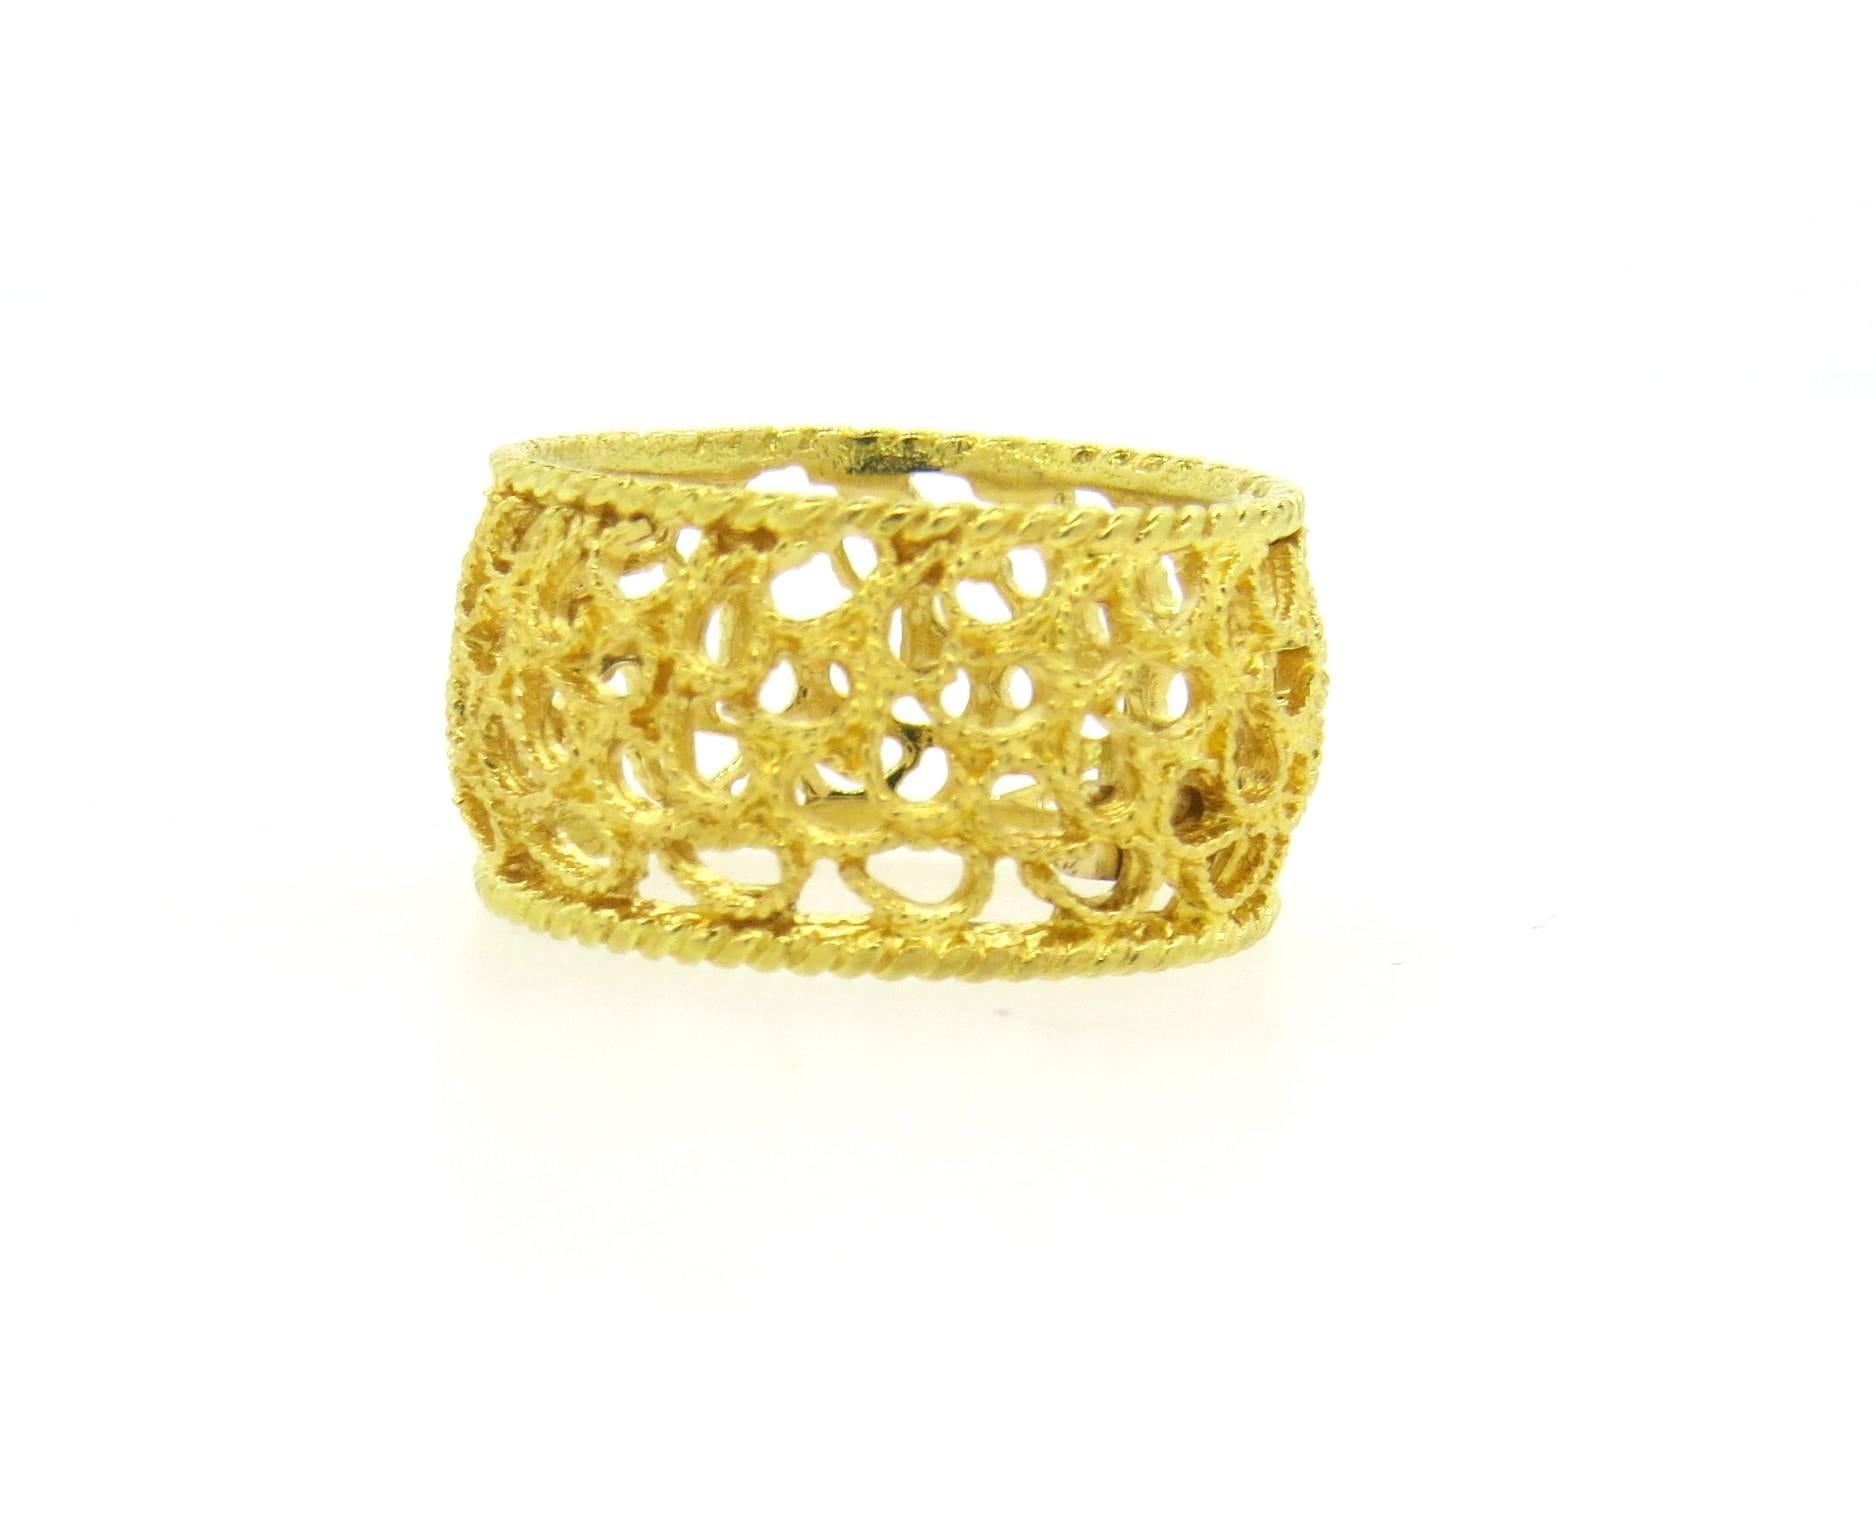 Wide 18k yellow gold ring, crafted by Buccellati. Ring is a size 6 and is 10.5mm wide. Marked: Buccellati, 750. Weight of the piece - 4.6 grams